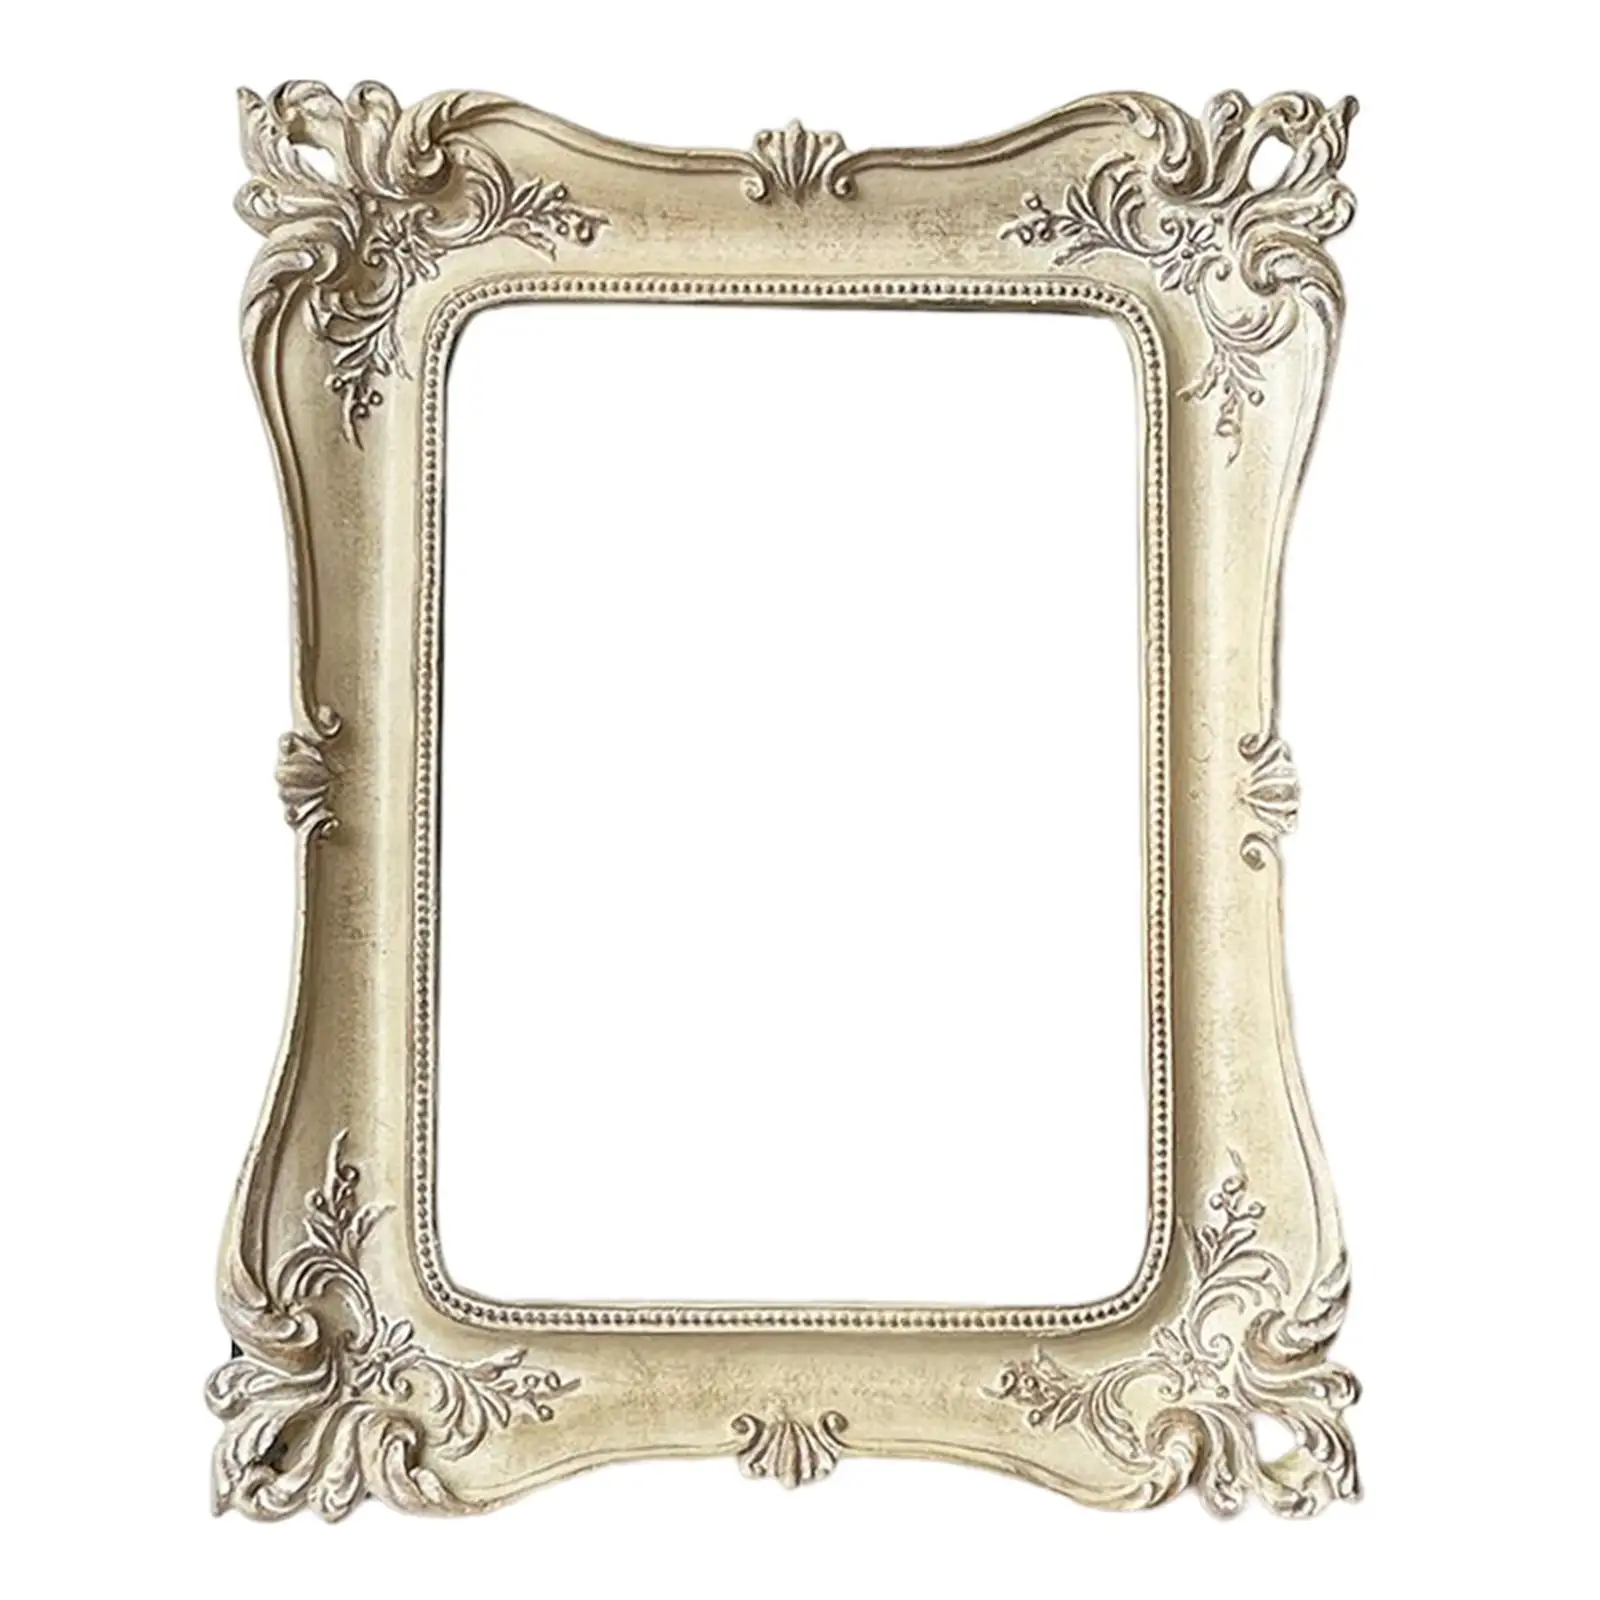 Luxury Antique Picture Frame Tabletop and Wall Hanging Wedding Gift Freestanding Deluxe Floral Design Vintage Photo Frames